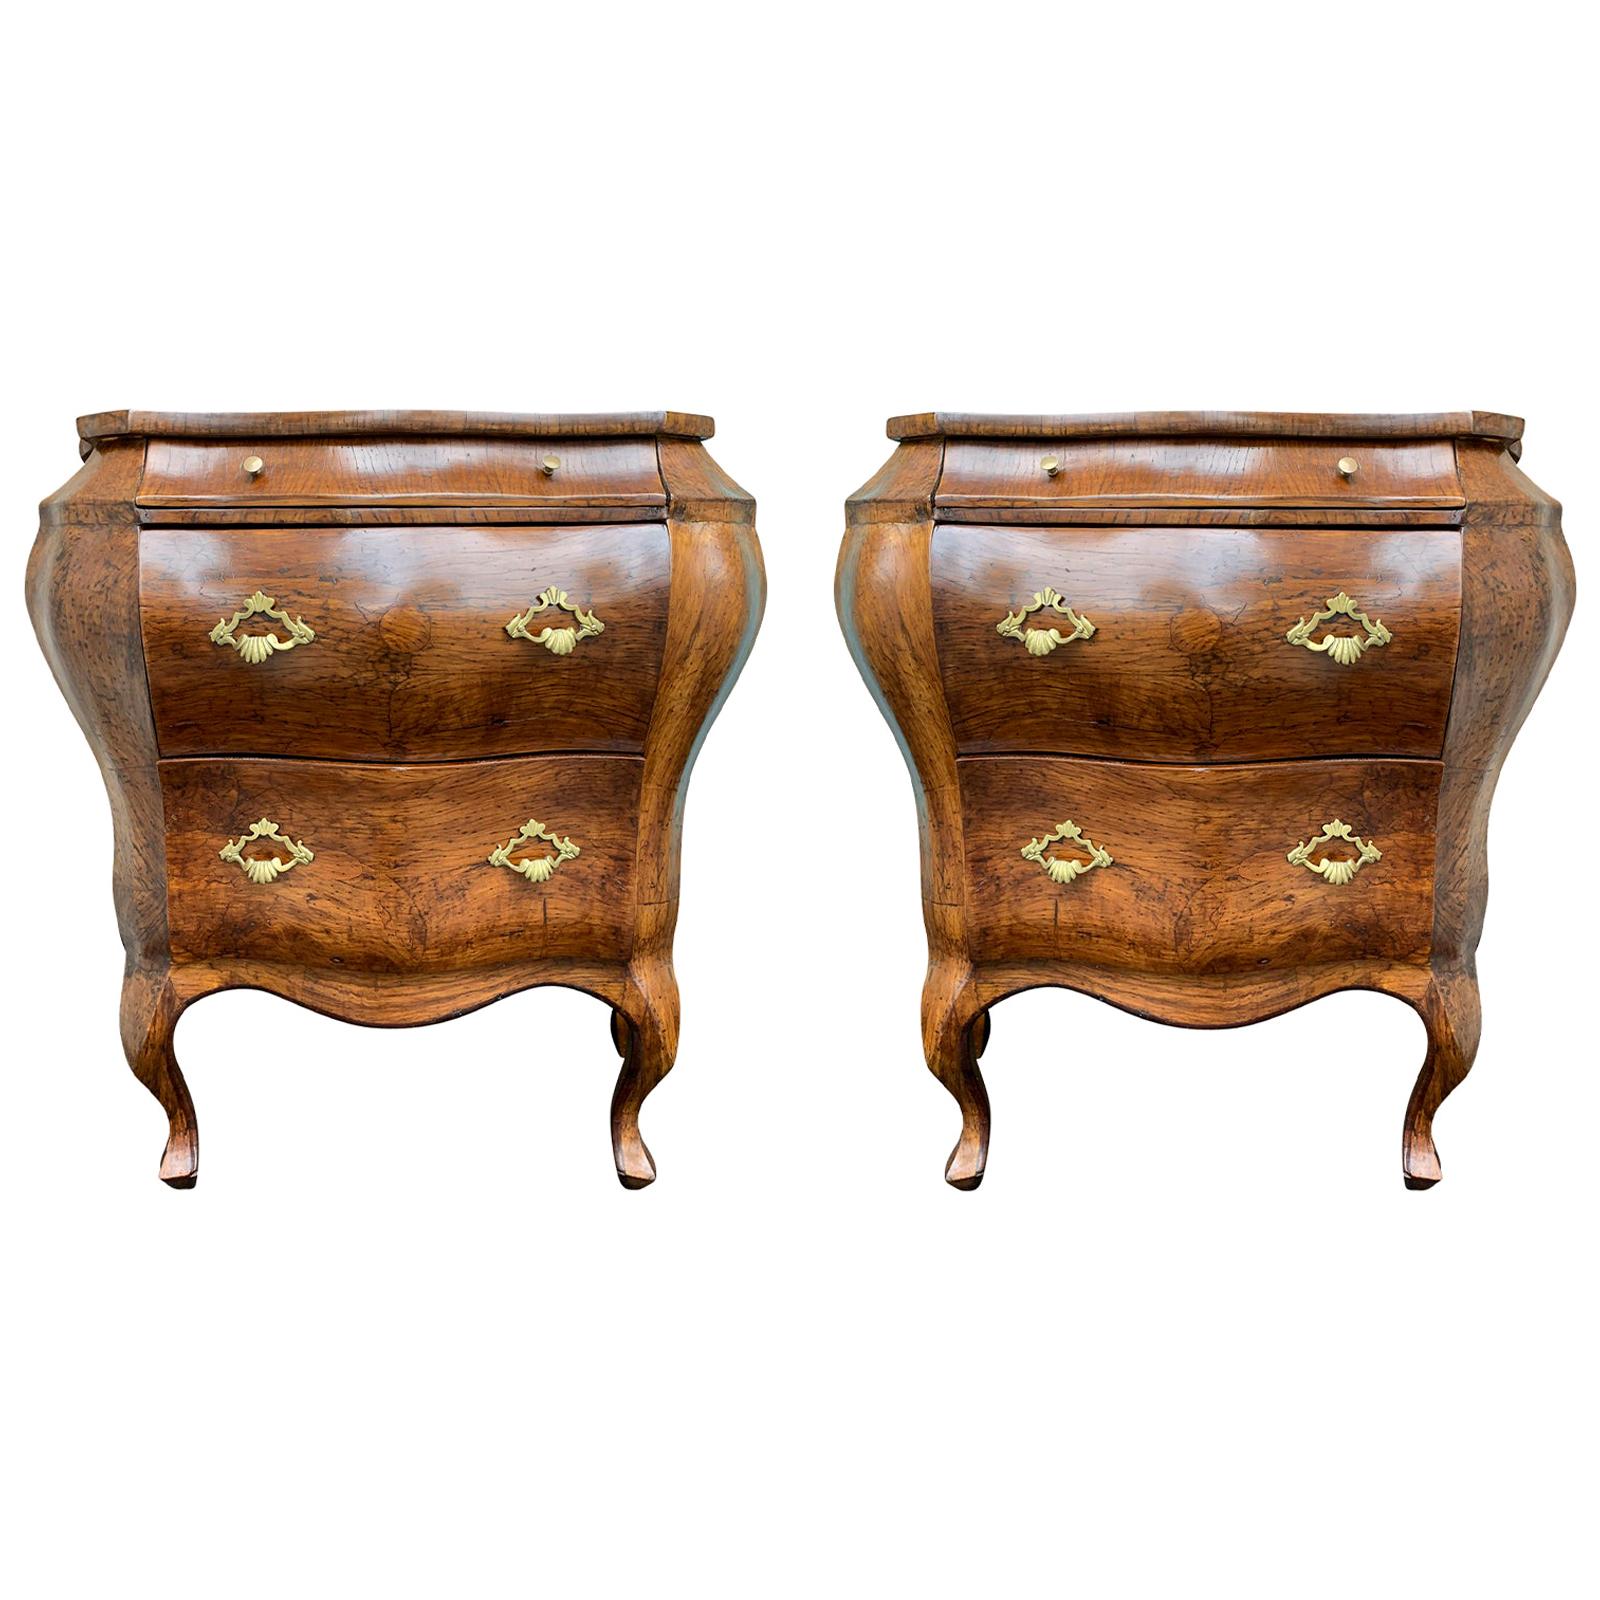 Pair of Mid-20th Century Italian Burled Olive Wood Bombe Form Bedside Commodes